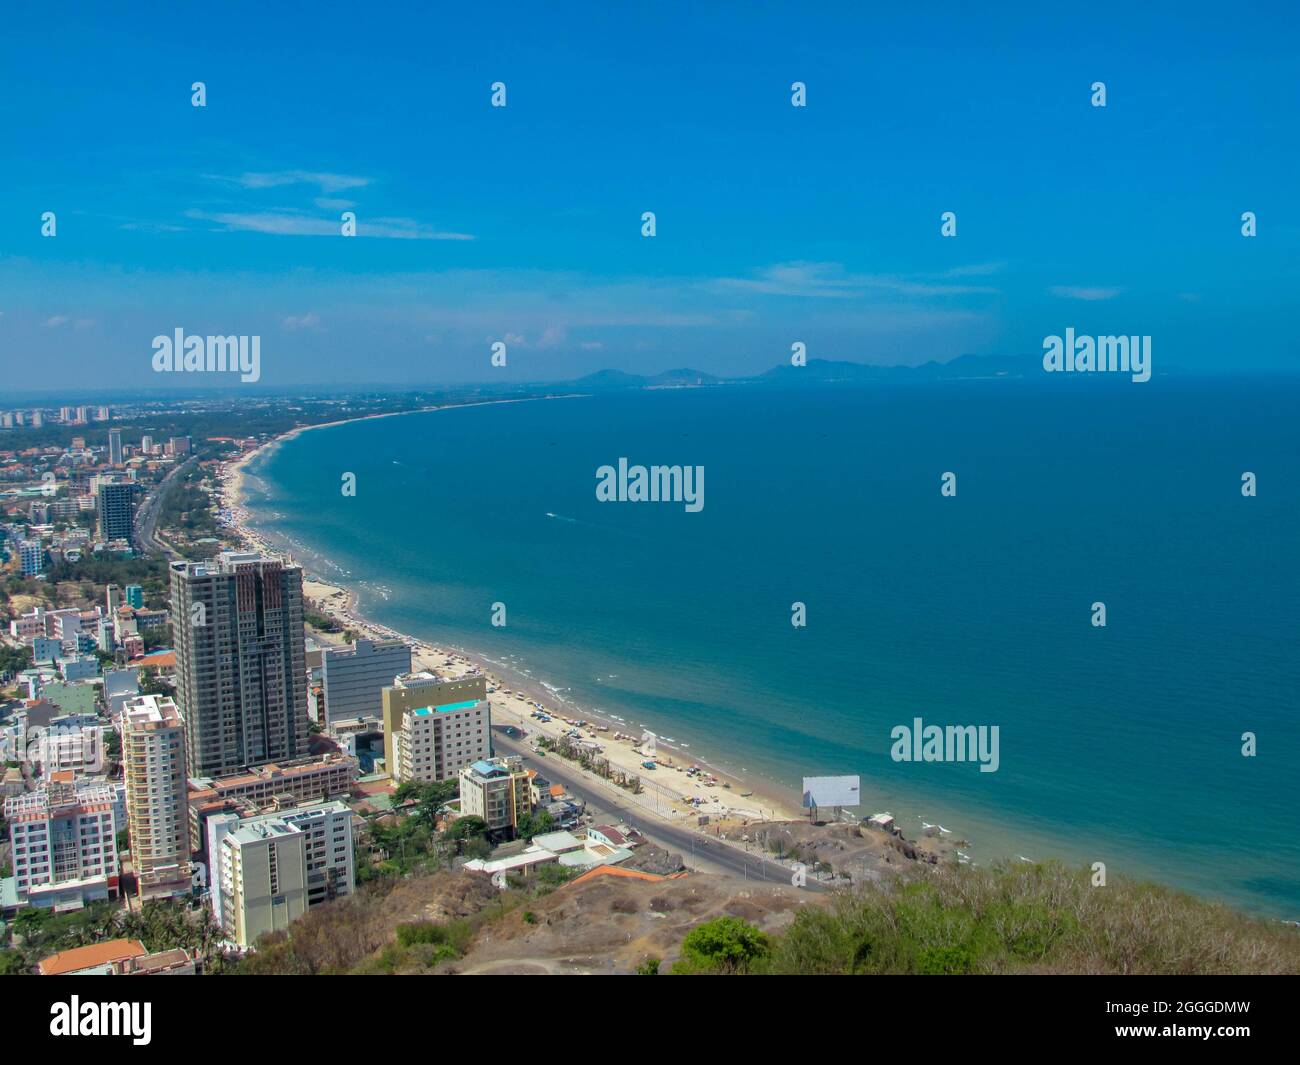 Vung Tau city and coast, Vietnam. Vung Tau is a famous tourism coastal city in the South of Vietnam Stock Photo